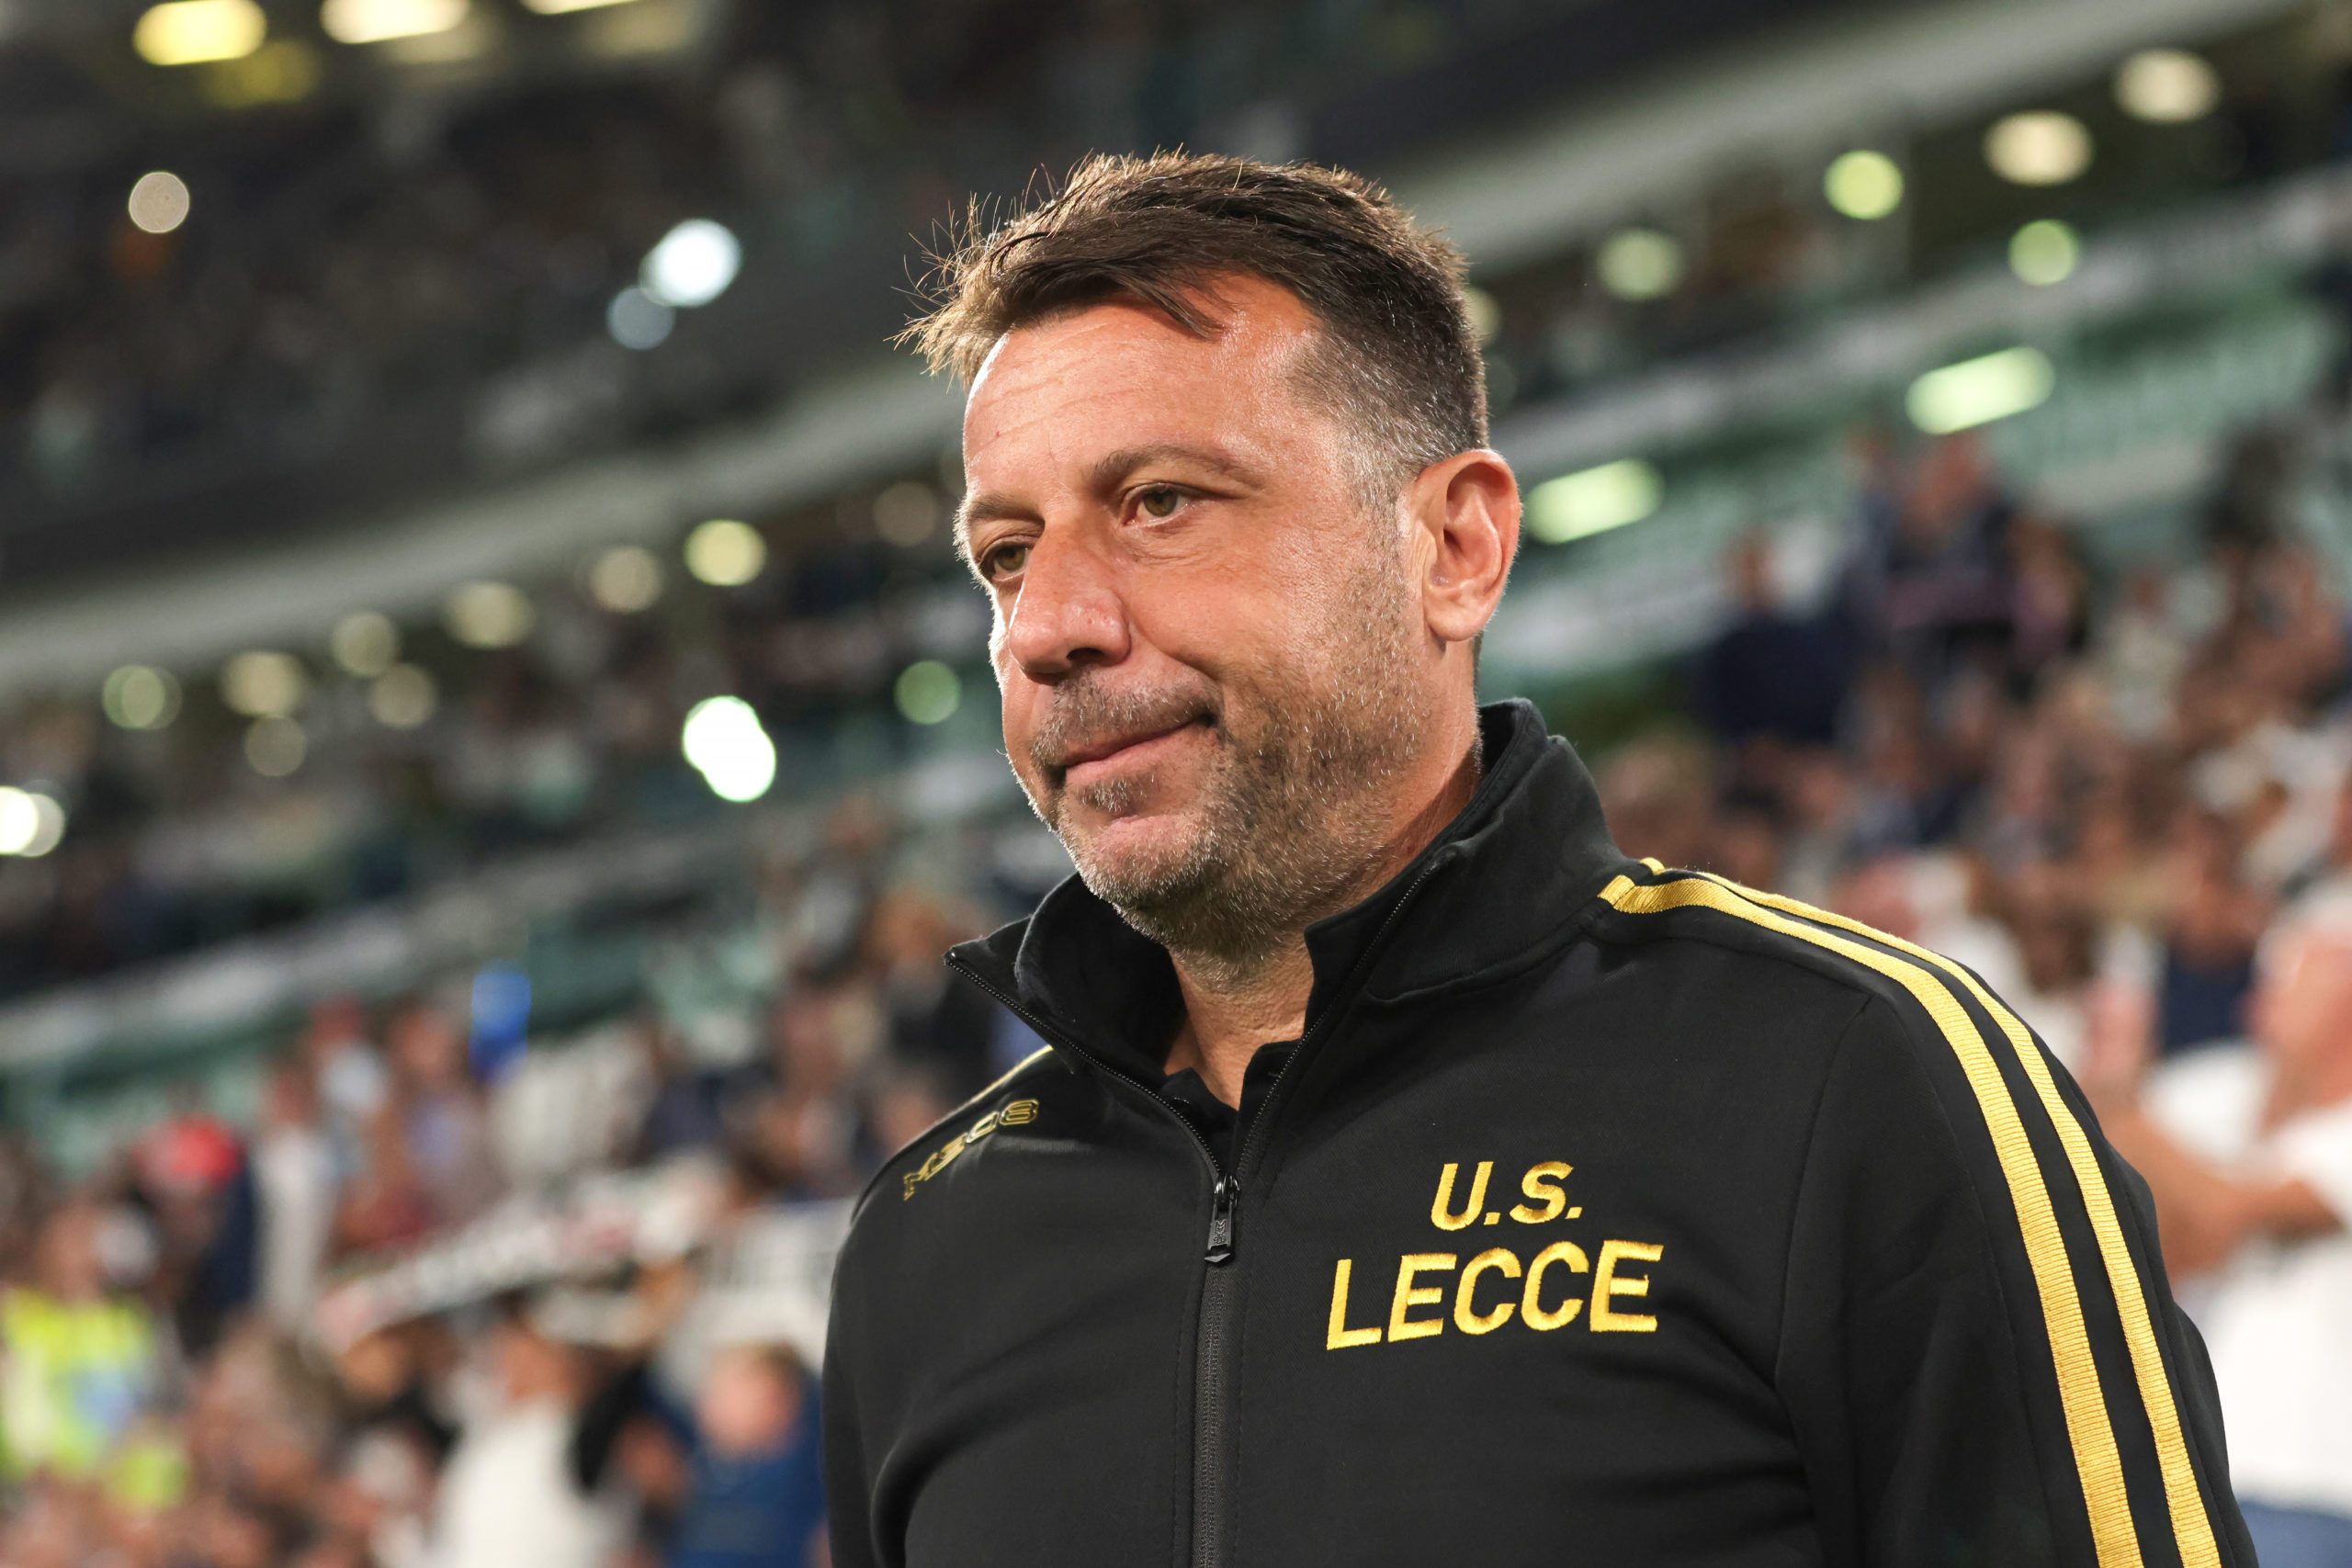 Lecce have decided to relieve Roberto D’Aversa of his duties following a series of poor results and a regrettable incident at the end of Lecce-Verona.